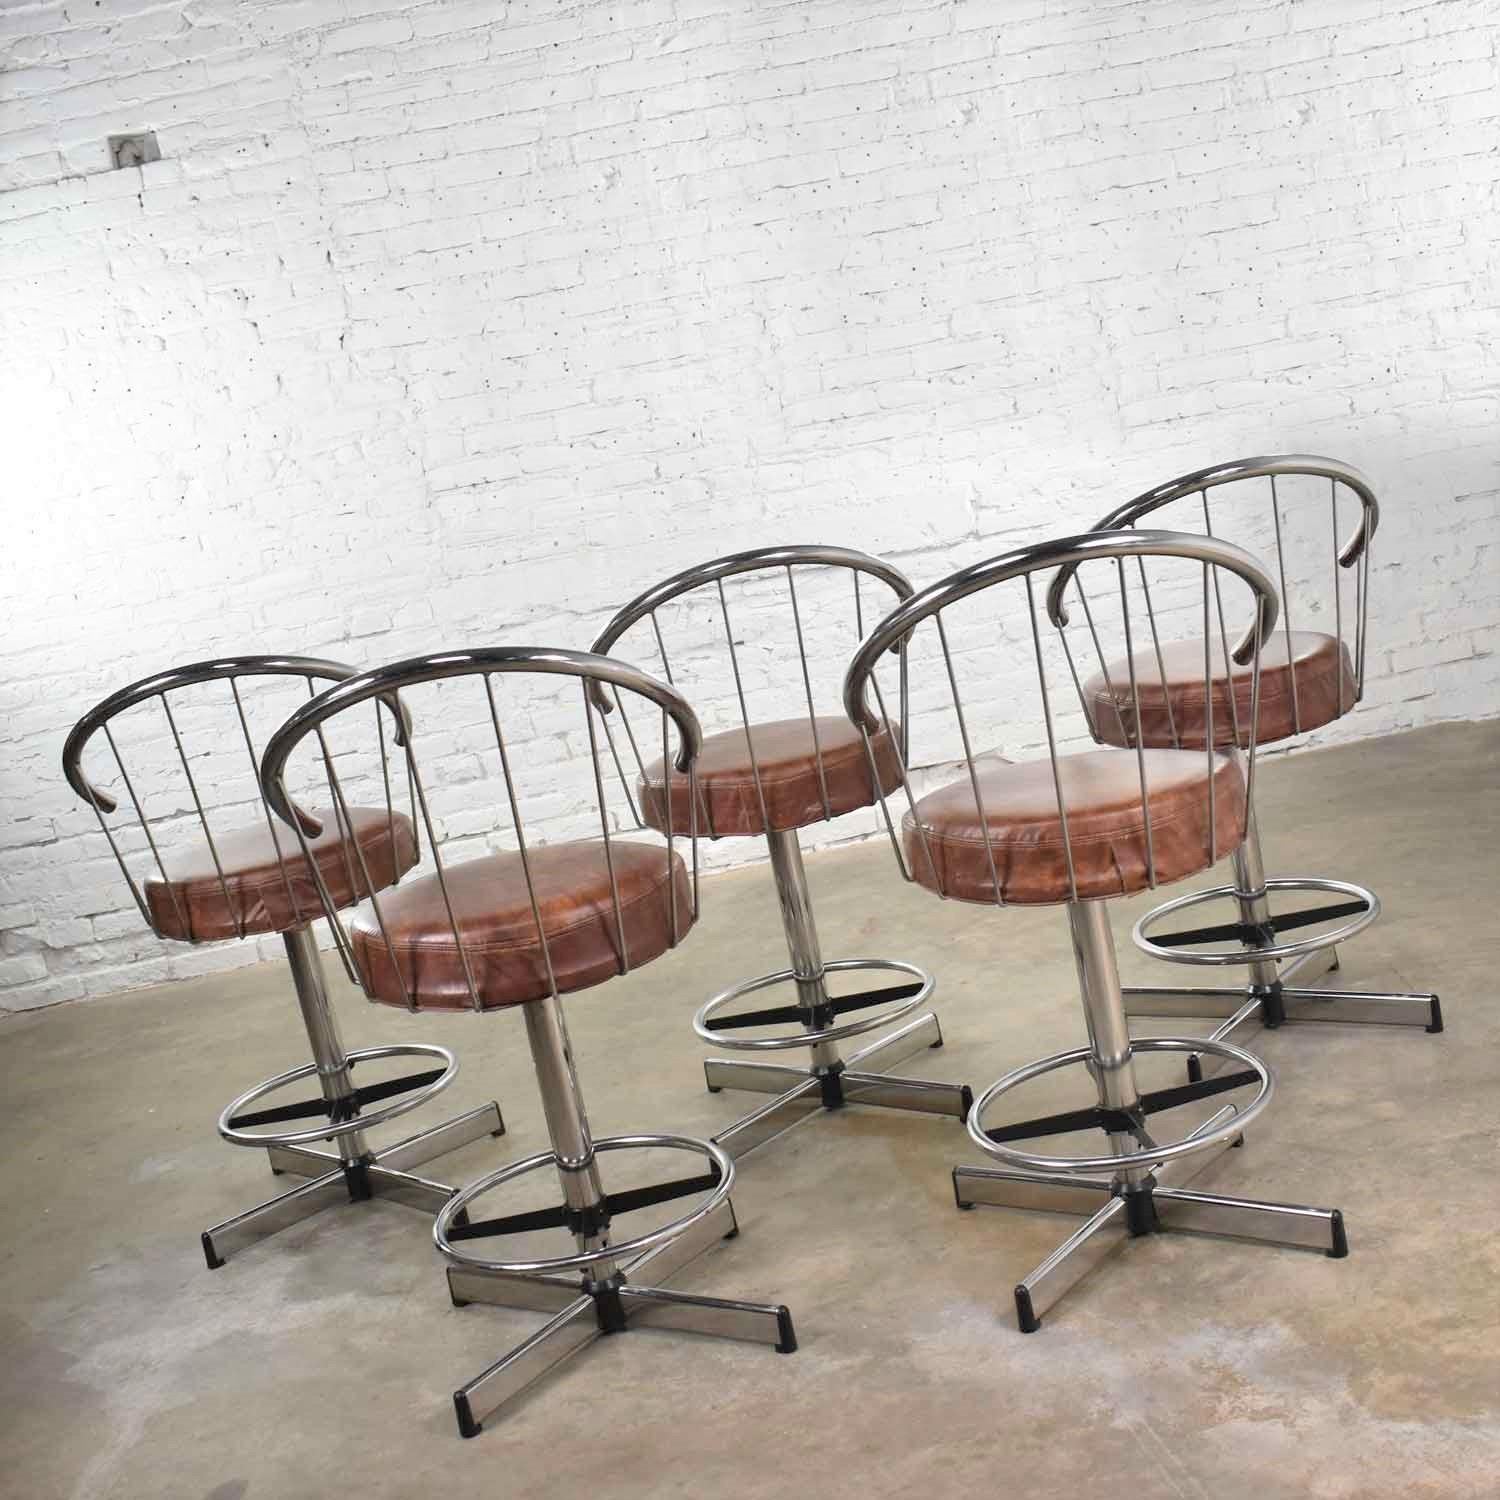 Handsome set of 5 vintage modern chrome bar stools or counter stools by Cosco with brown vinyl faux leather seats. They are in awesome vintage condition. There is some wear to the vinyl and normal signs of age to chrome. Please see photos, circa